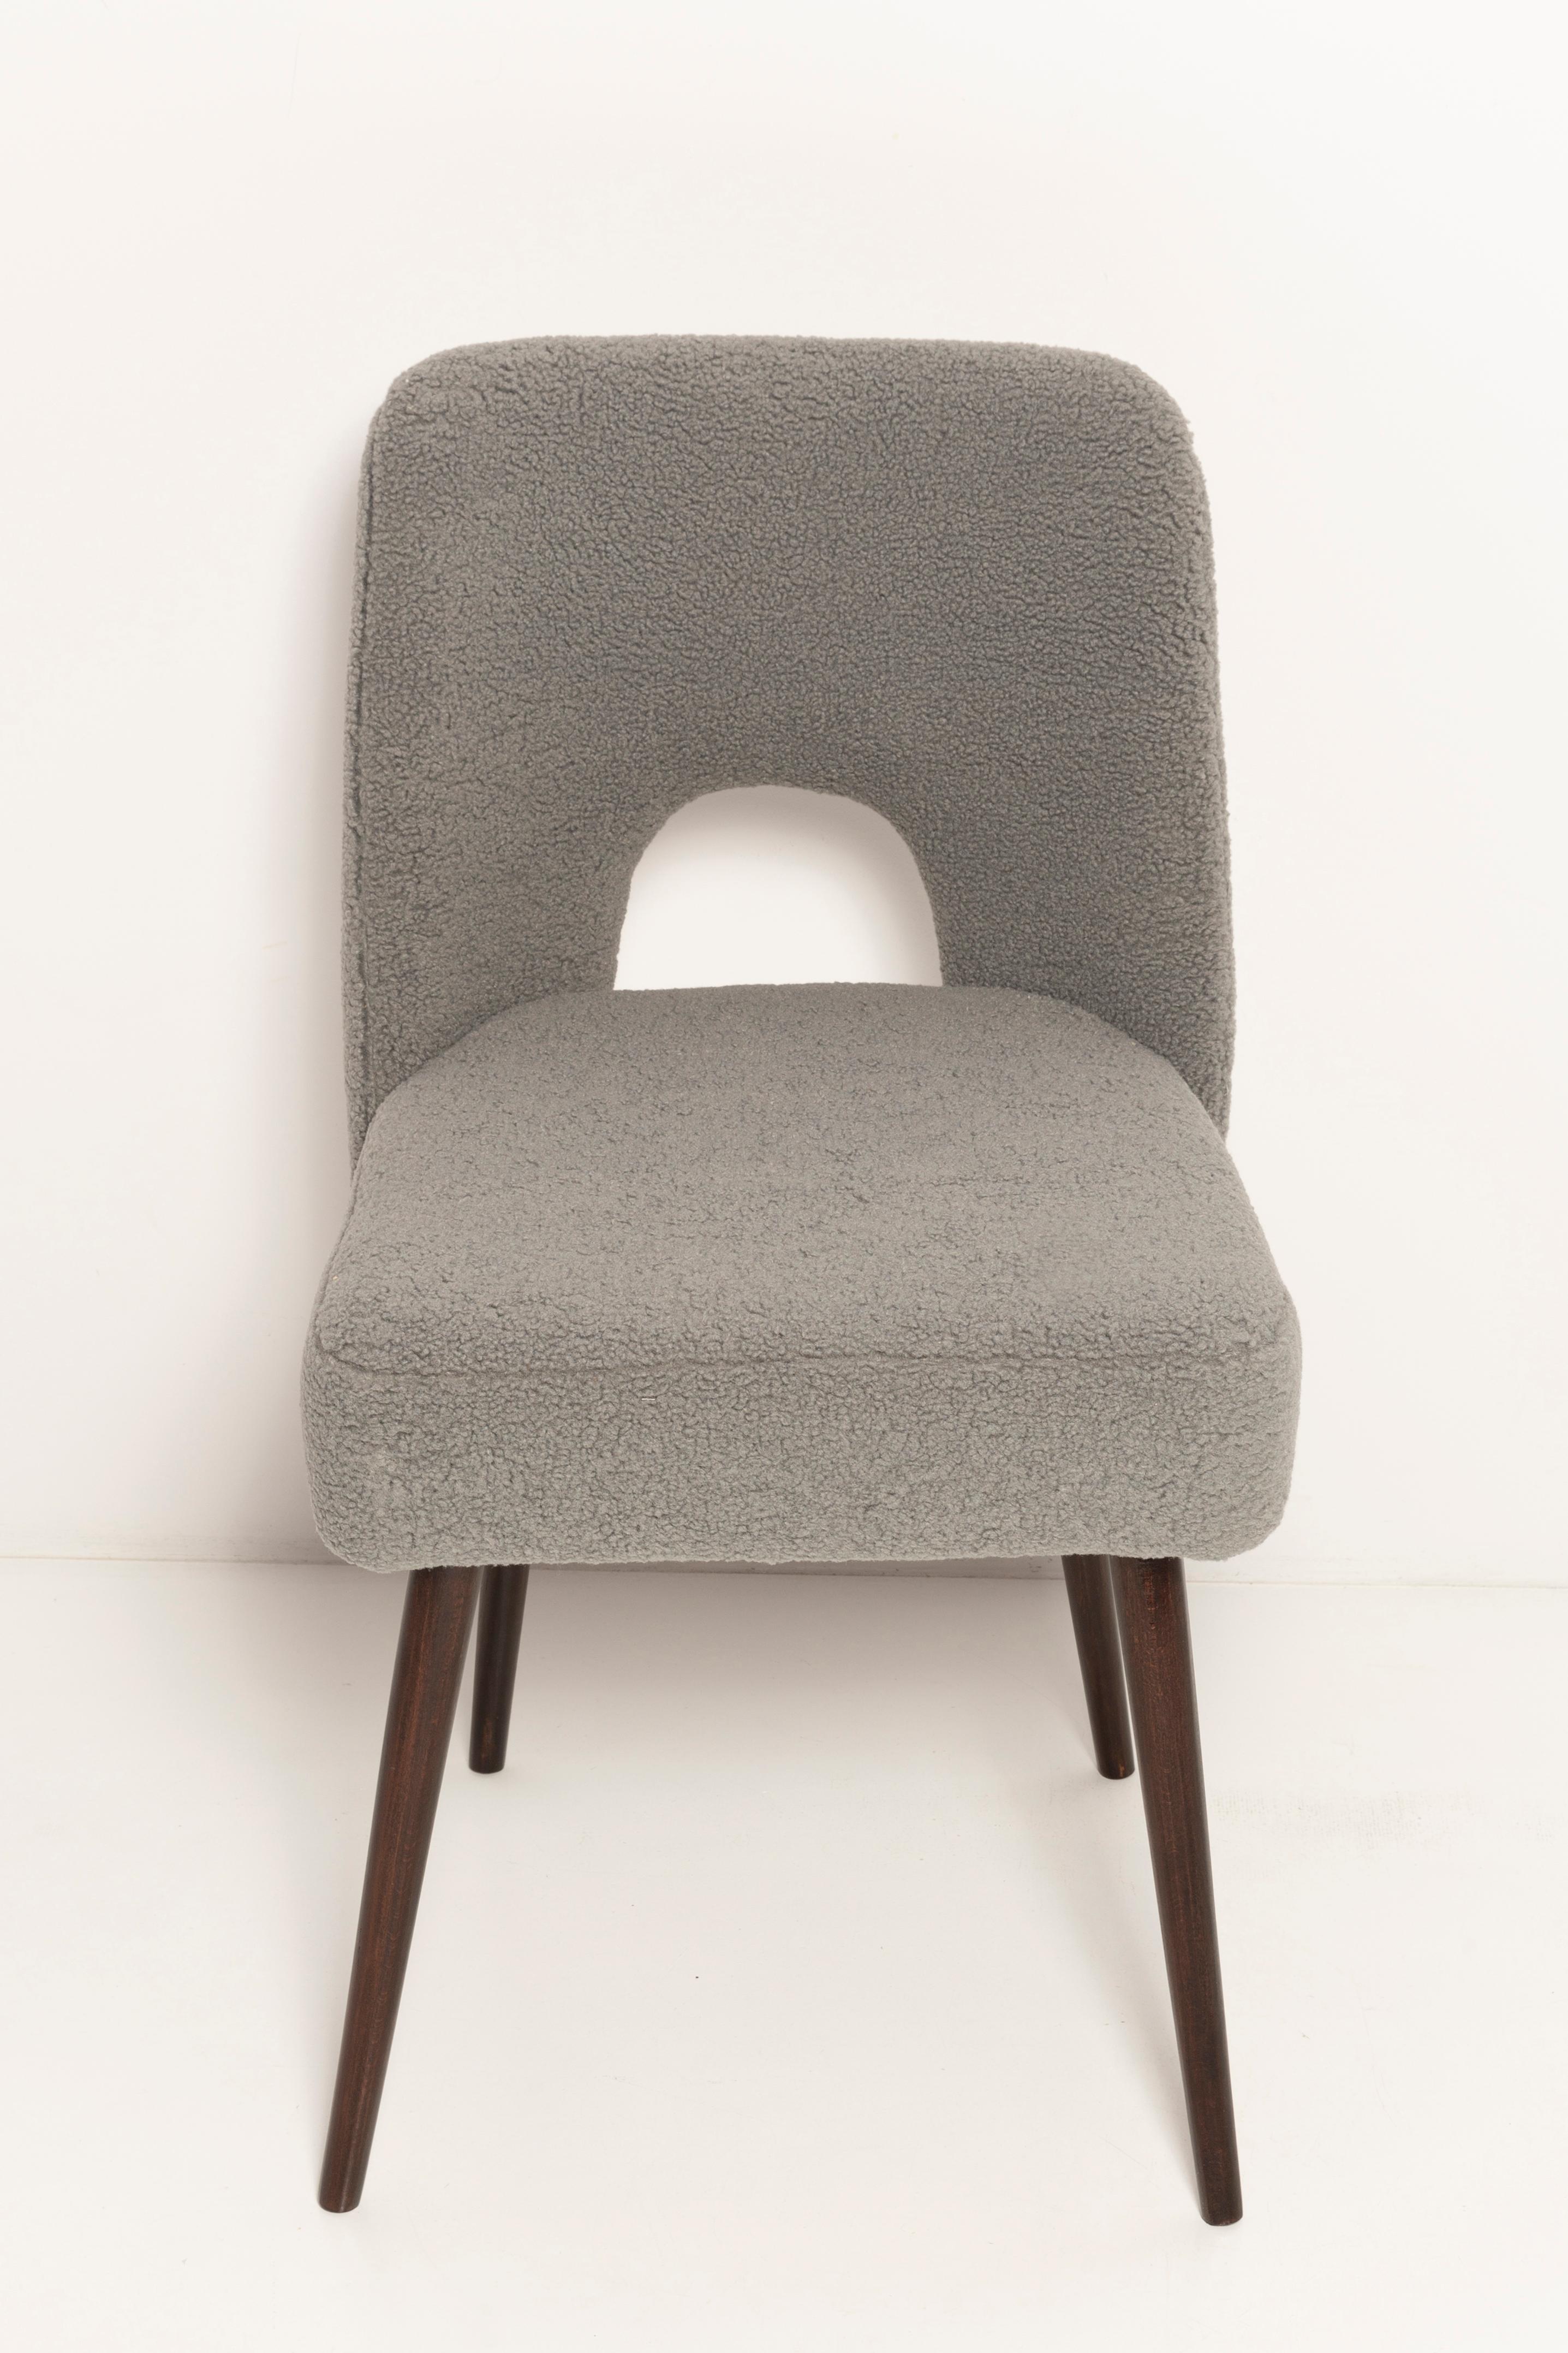 Set of Four Gray Boucle 'Shell' Chairs, Europe, 1960s For Sale 2